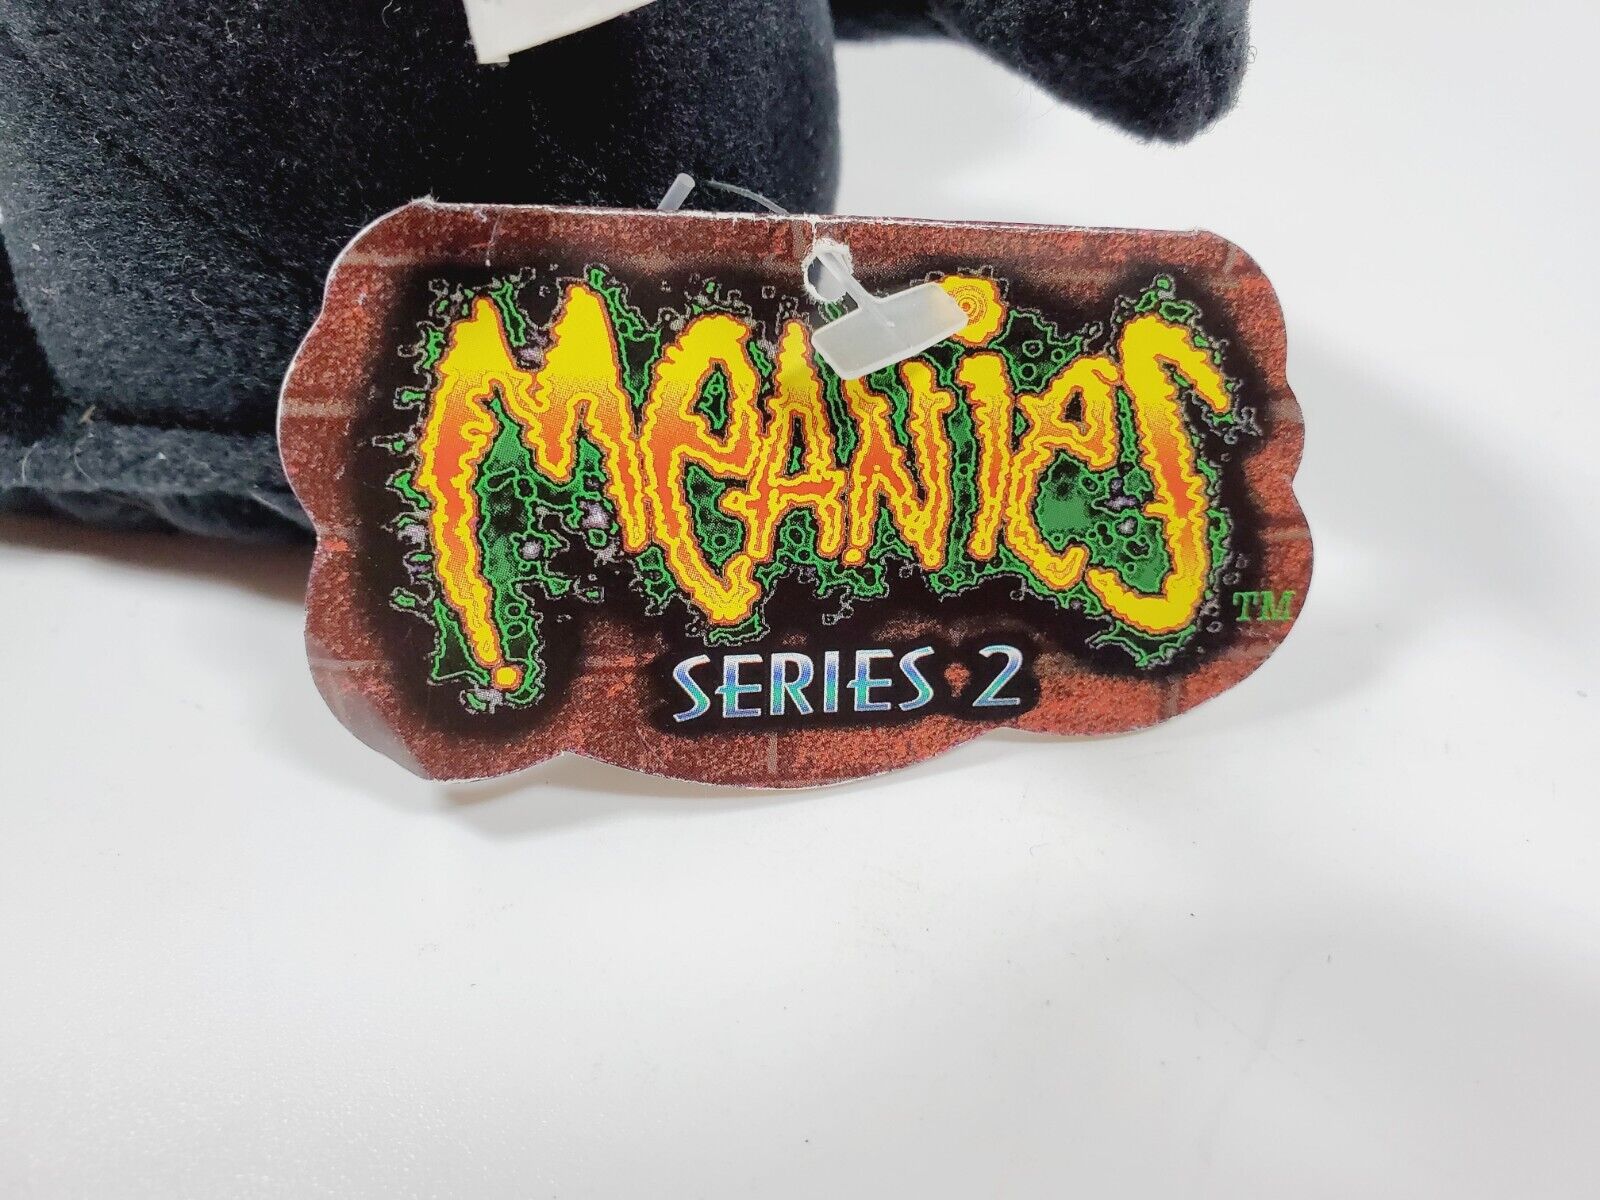 Meanies Series 2 Digger the Scottish Terrier Bean Bag Plush with Tags N. Y Toys - фотография #5